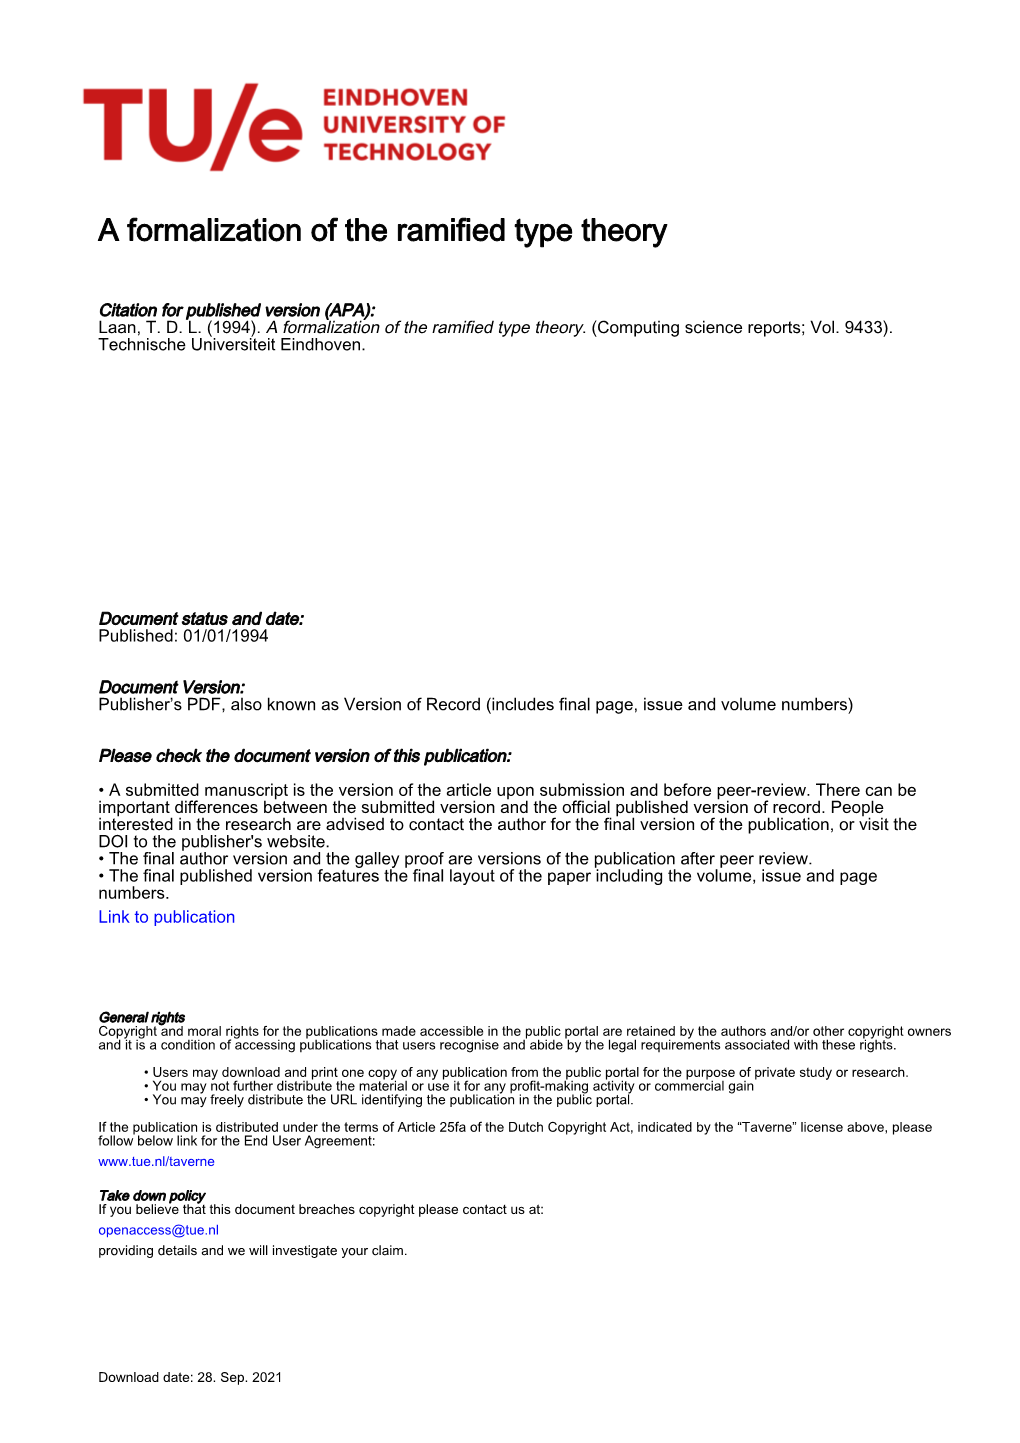 A Formalization of the Ramified Type Theory